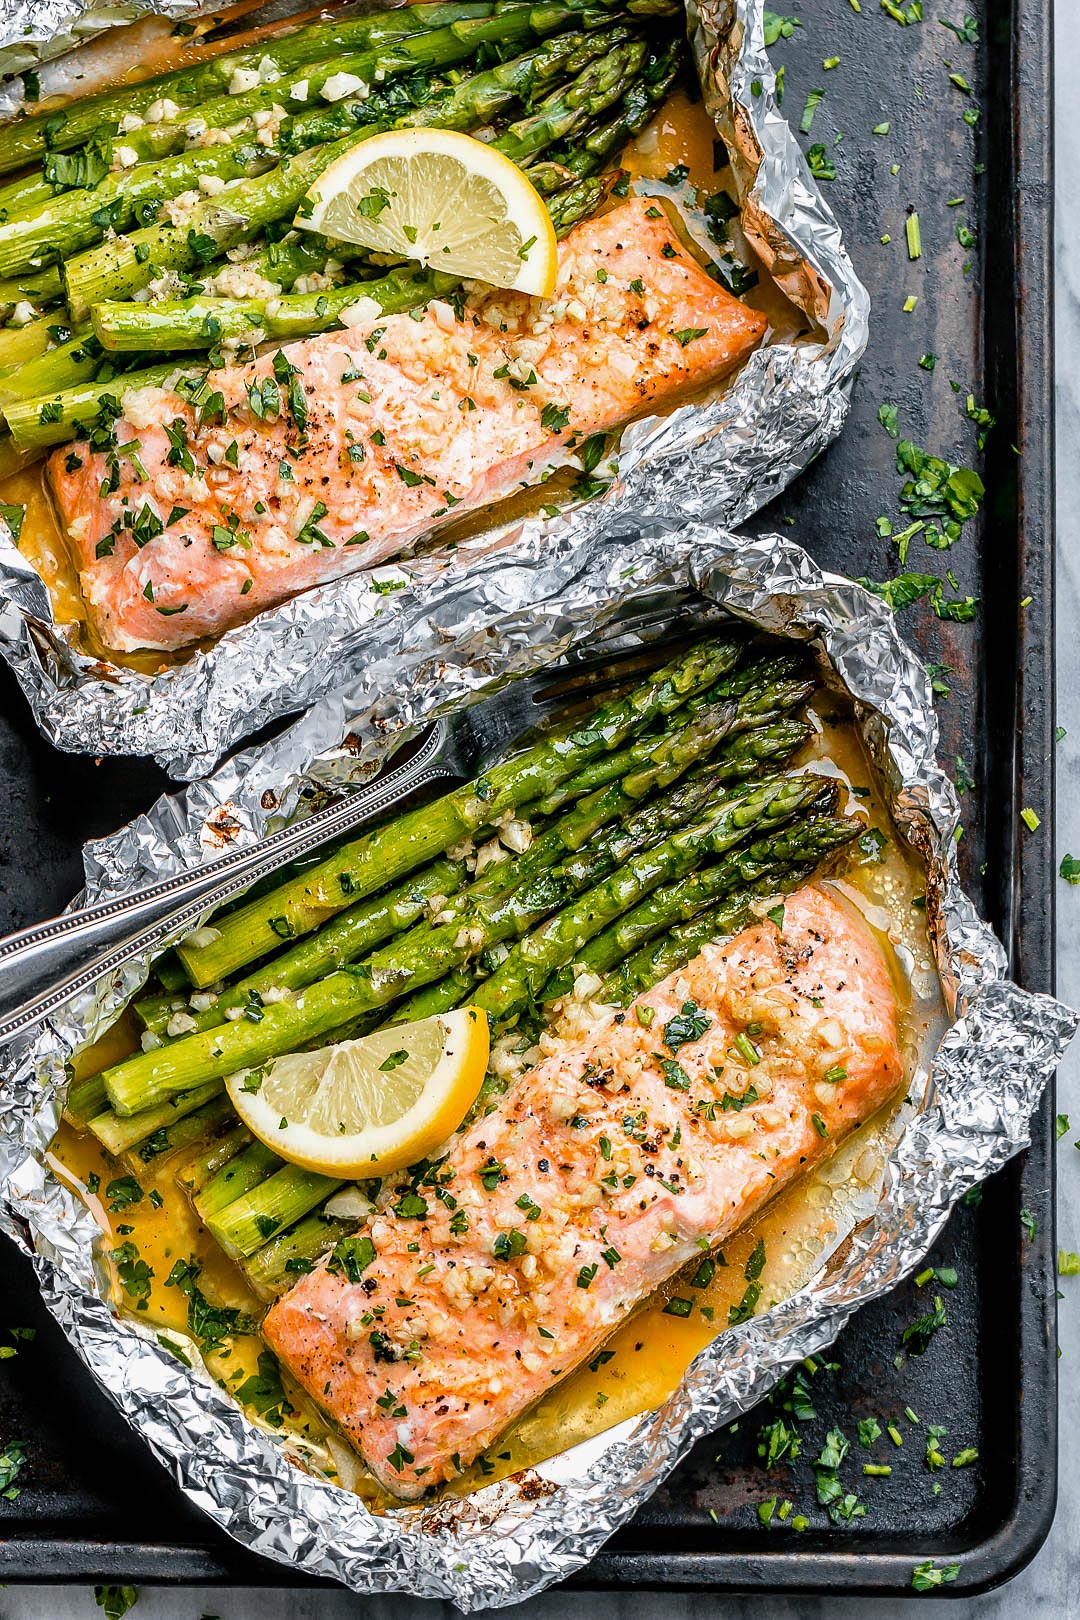 Baked Salmon In Foil Packs With Asparagus And Garlic Butter Sauce Best Salmon Recipe Eatwell101